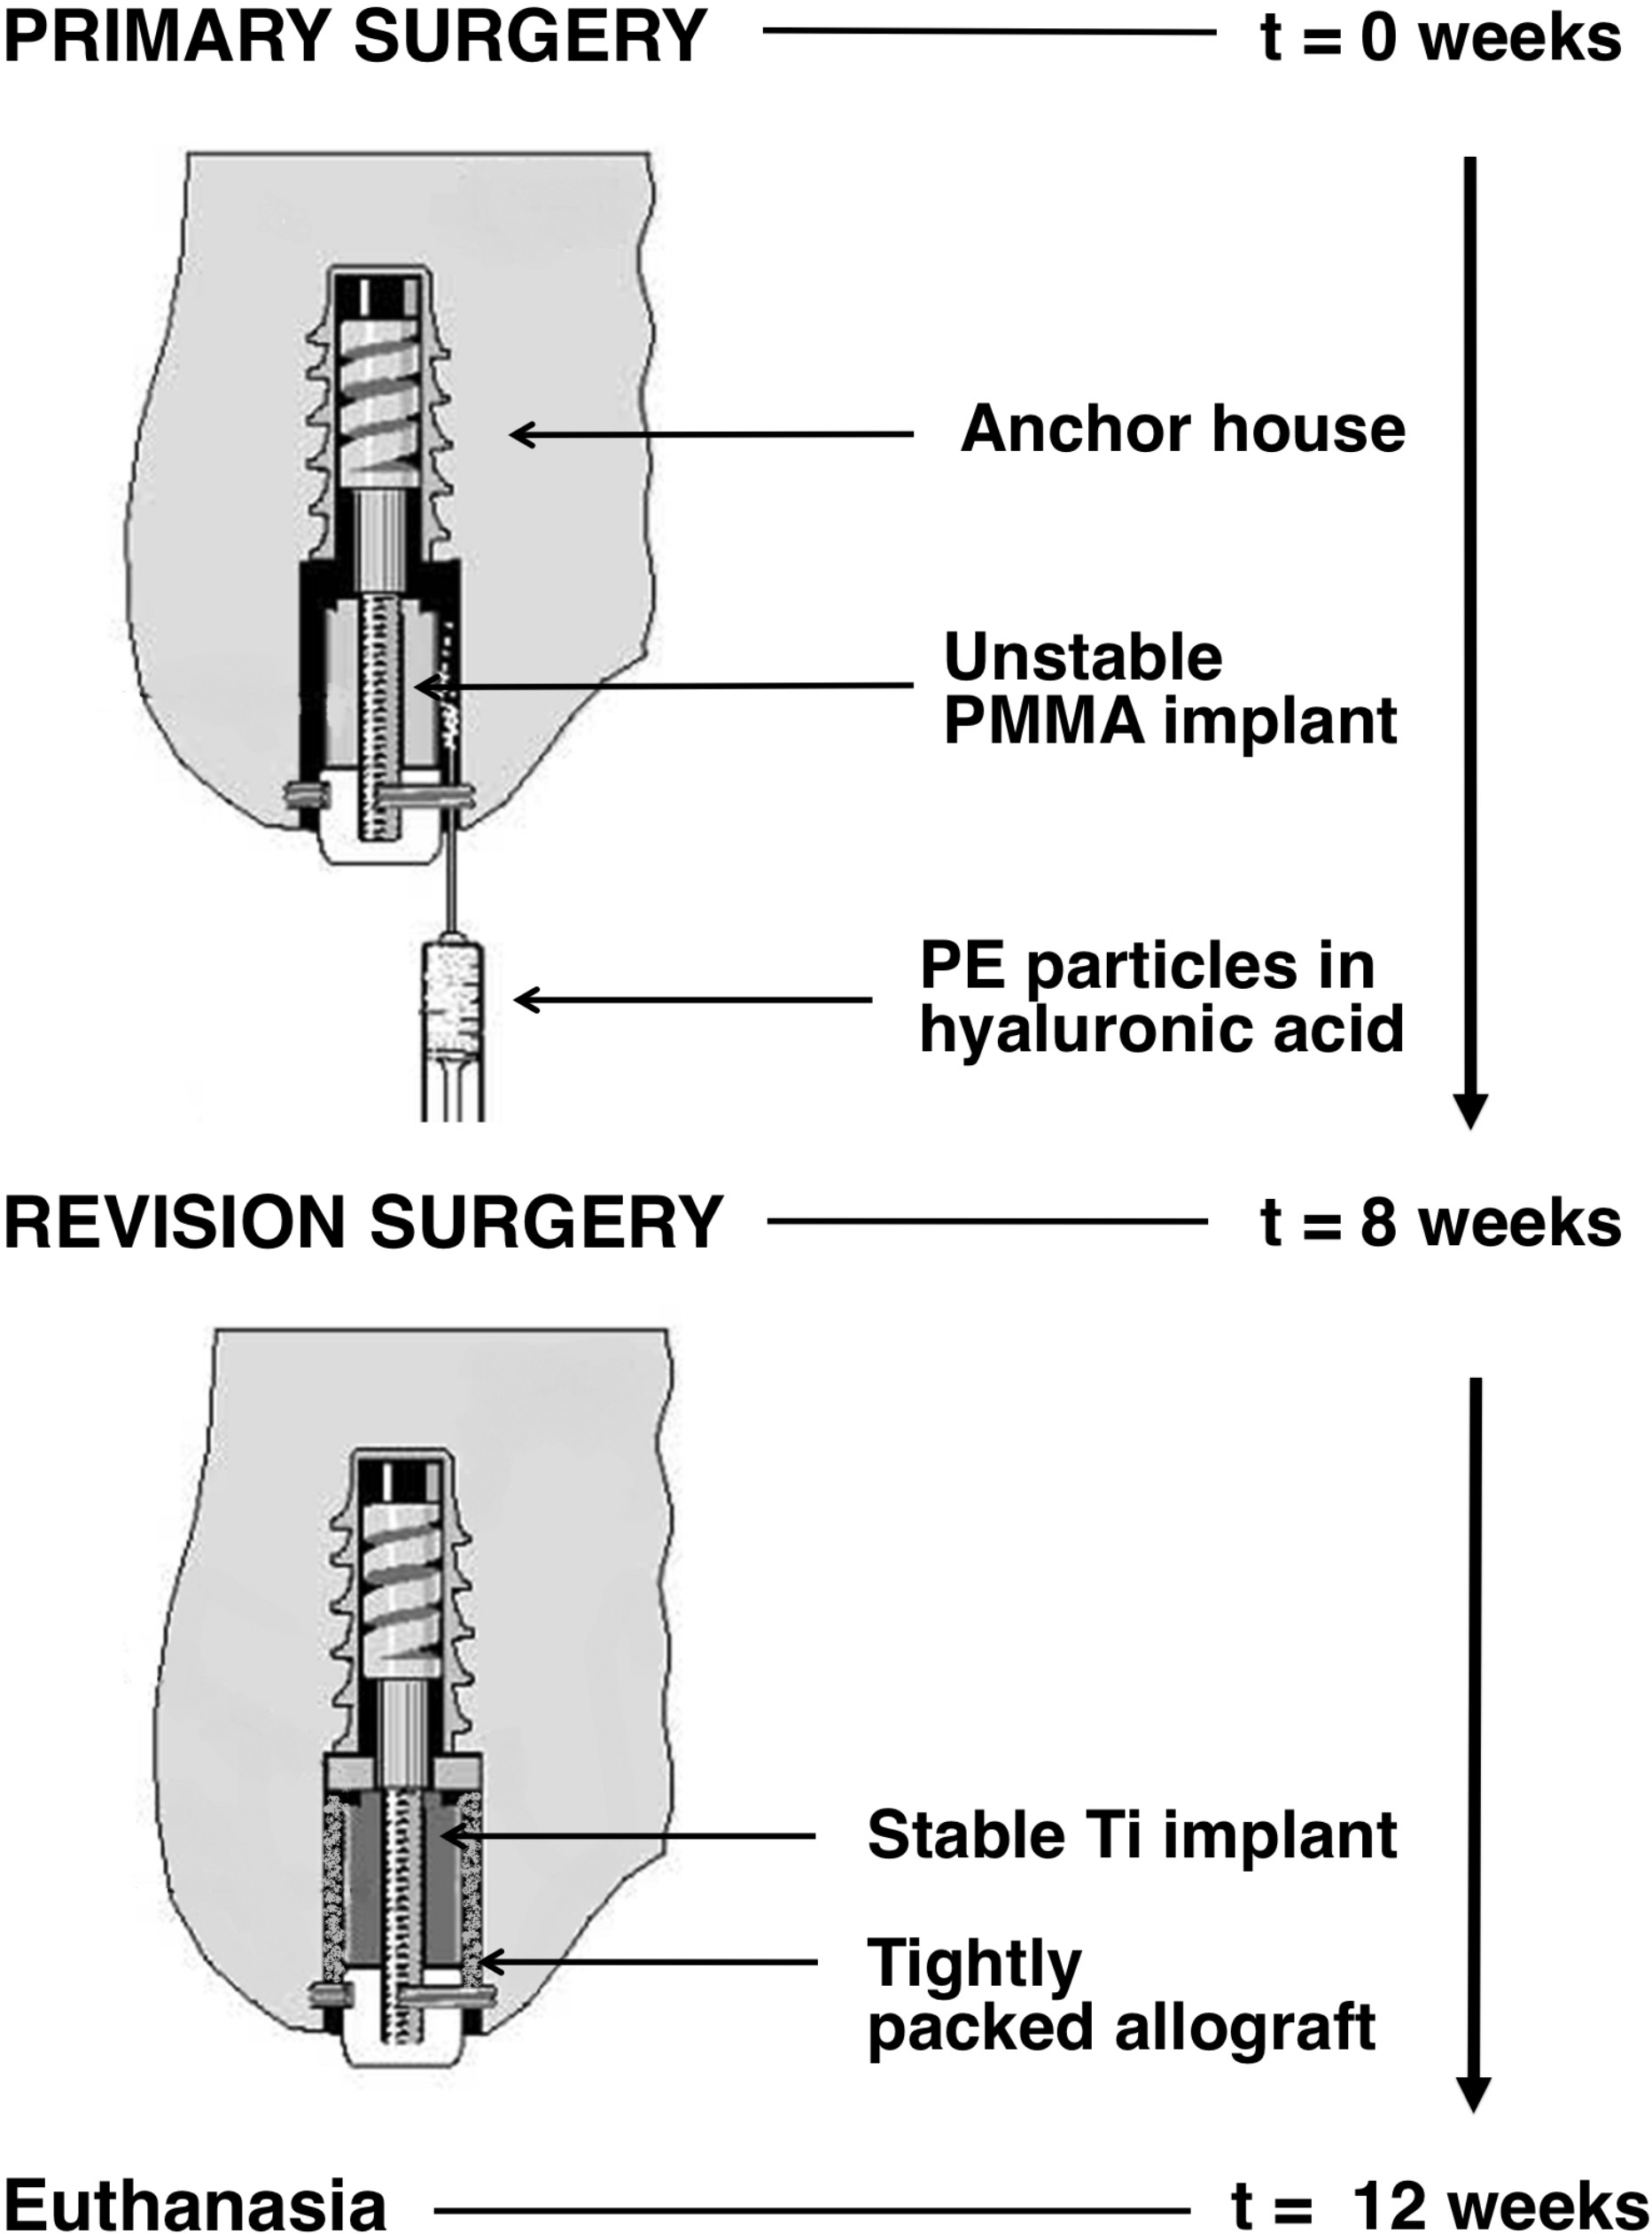 Fig. 2 
            Illustration of revision protocols time sequence (right) and surgical procedures (left). At primary surgery (t = 0 weeks), a micromotion device, with a poly(methyl methacrylate) (PMMA) implant attached, was inserted into the medial condyle of each stifle joint with particulate polyethylene (PE) particles, representing a loose cement mantle and wear particles. At revision procedure (t = 8 weeks), the cavity was reamed and the PMMA implant replaced with a titanium (Ti) revision implant impacted with allograft. The animals were observed for an additional four weeks before euthanasia (t = 12 weeks).
          